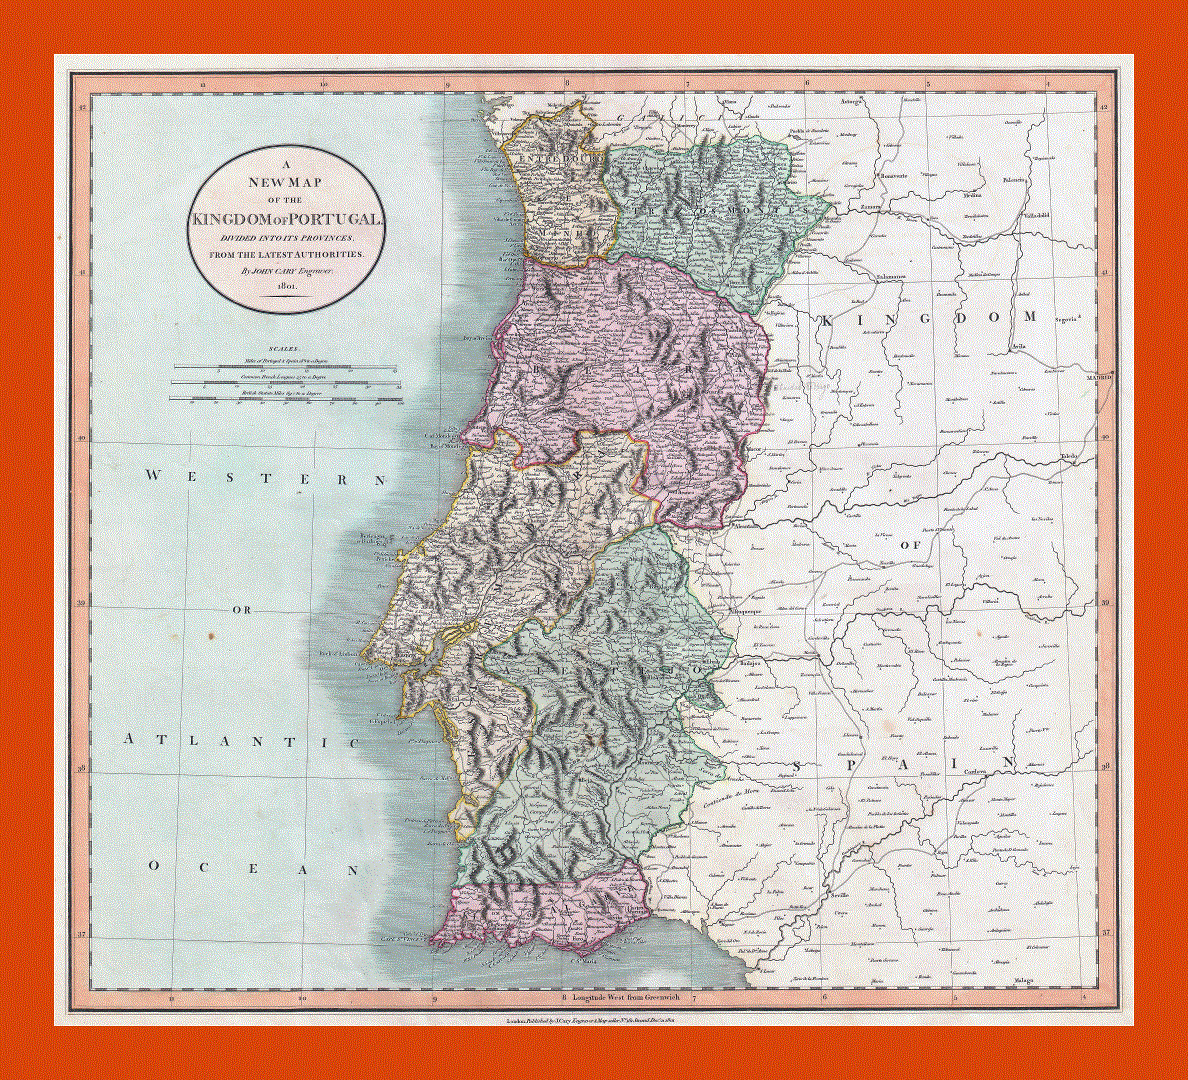 Old political and administrative map of Portugal - 1801